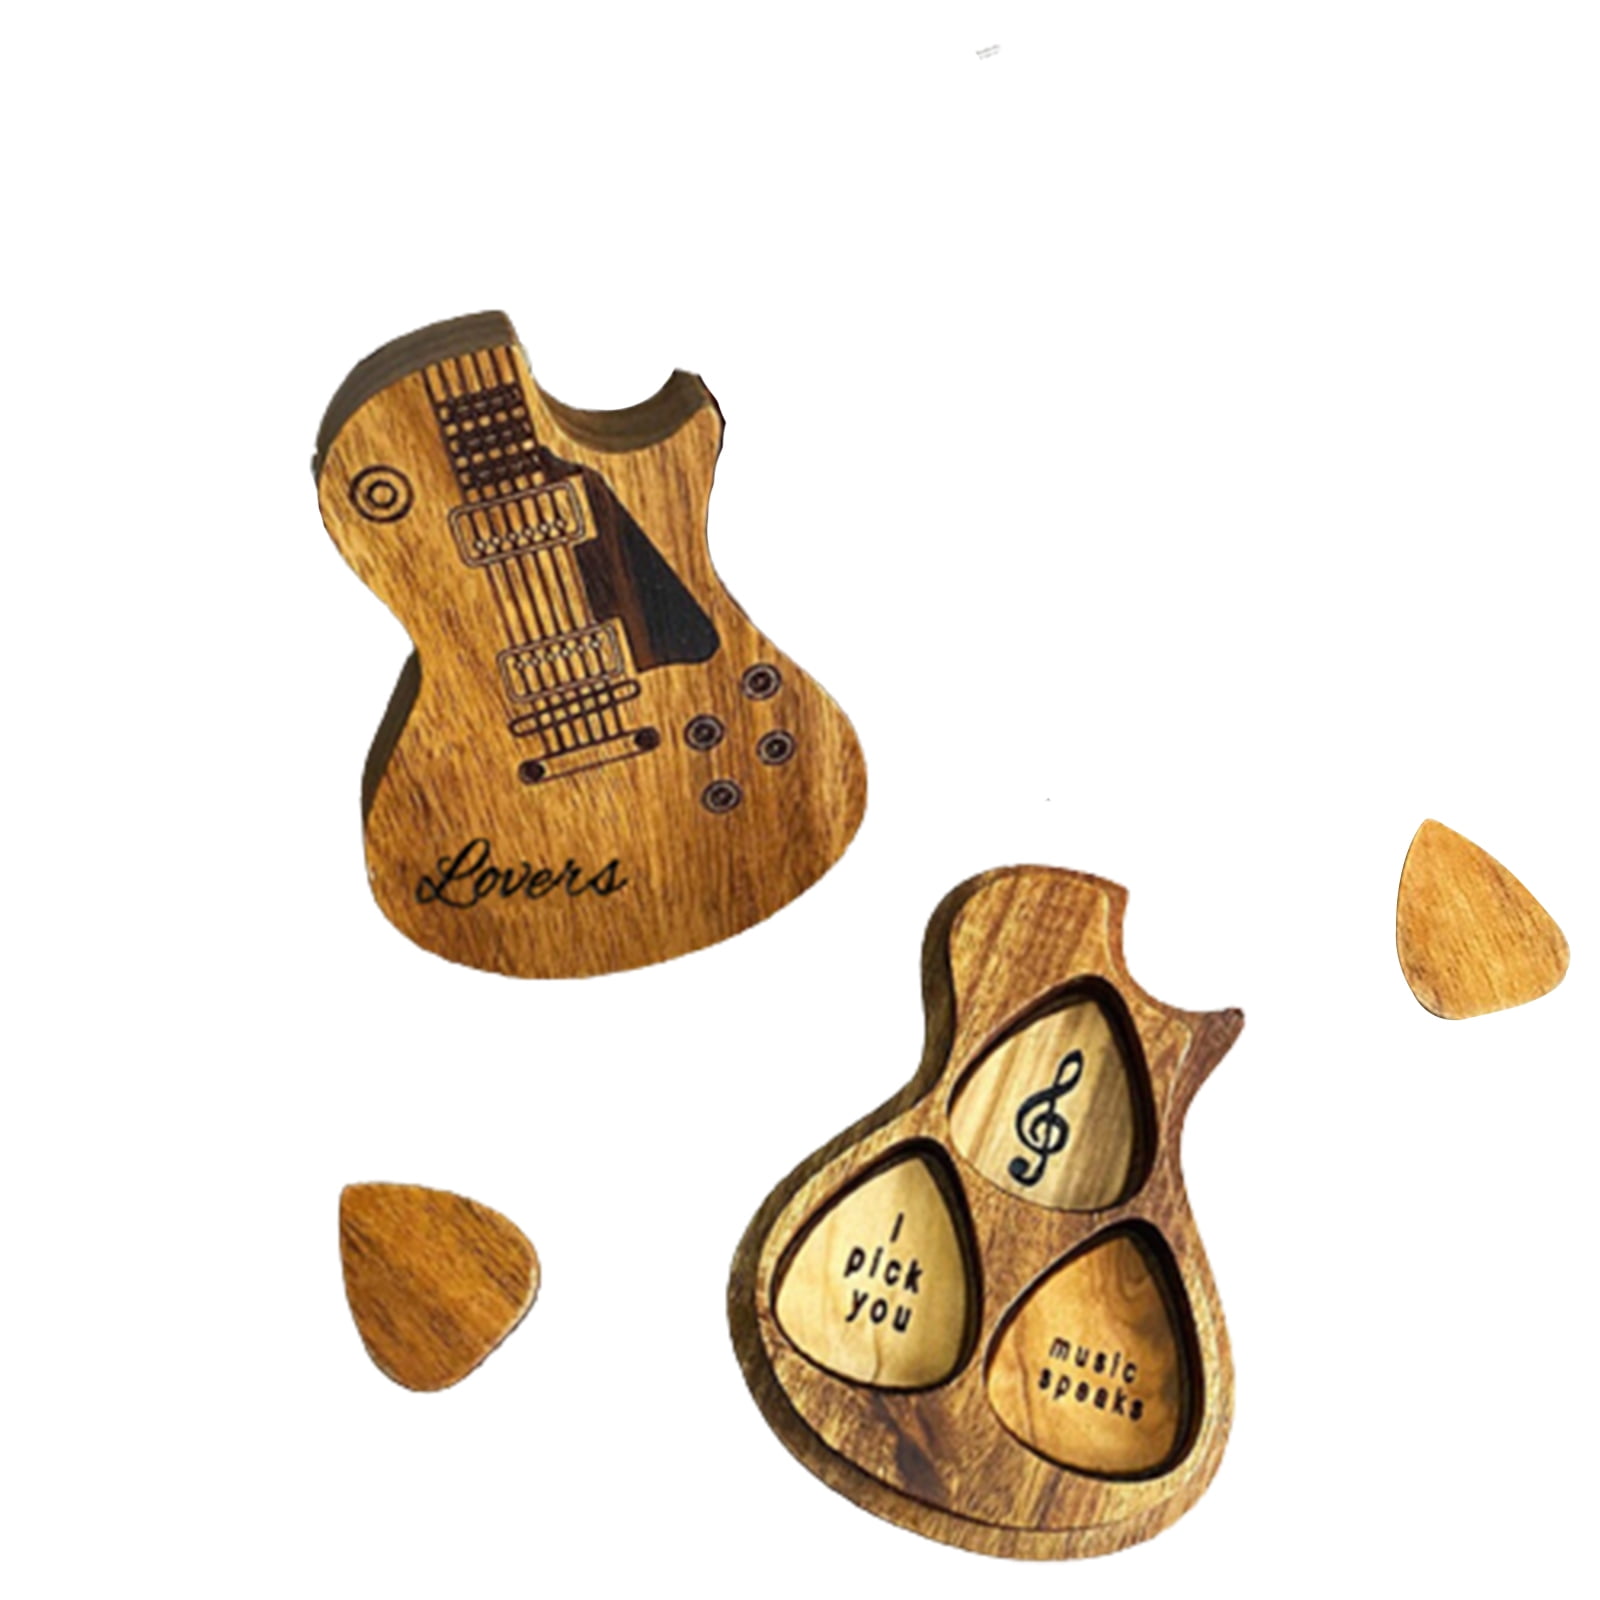 Personalized Custom Wooden， Engraved Guitar Pick Box， Plectrum Container with 2 Pcs Guitar Pick for Guitar Standard Picks L 